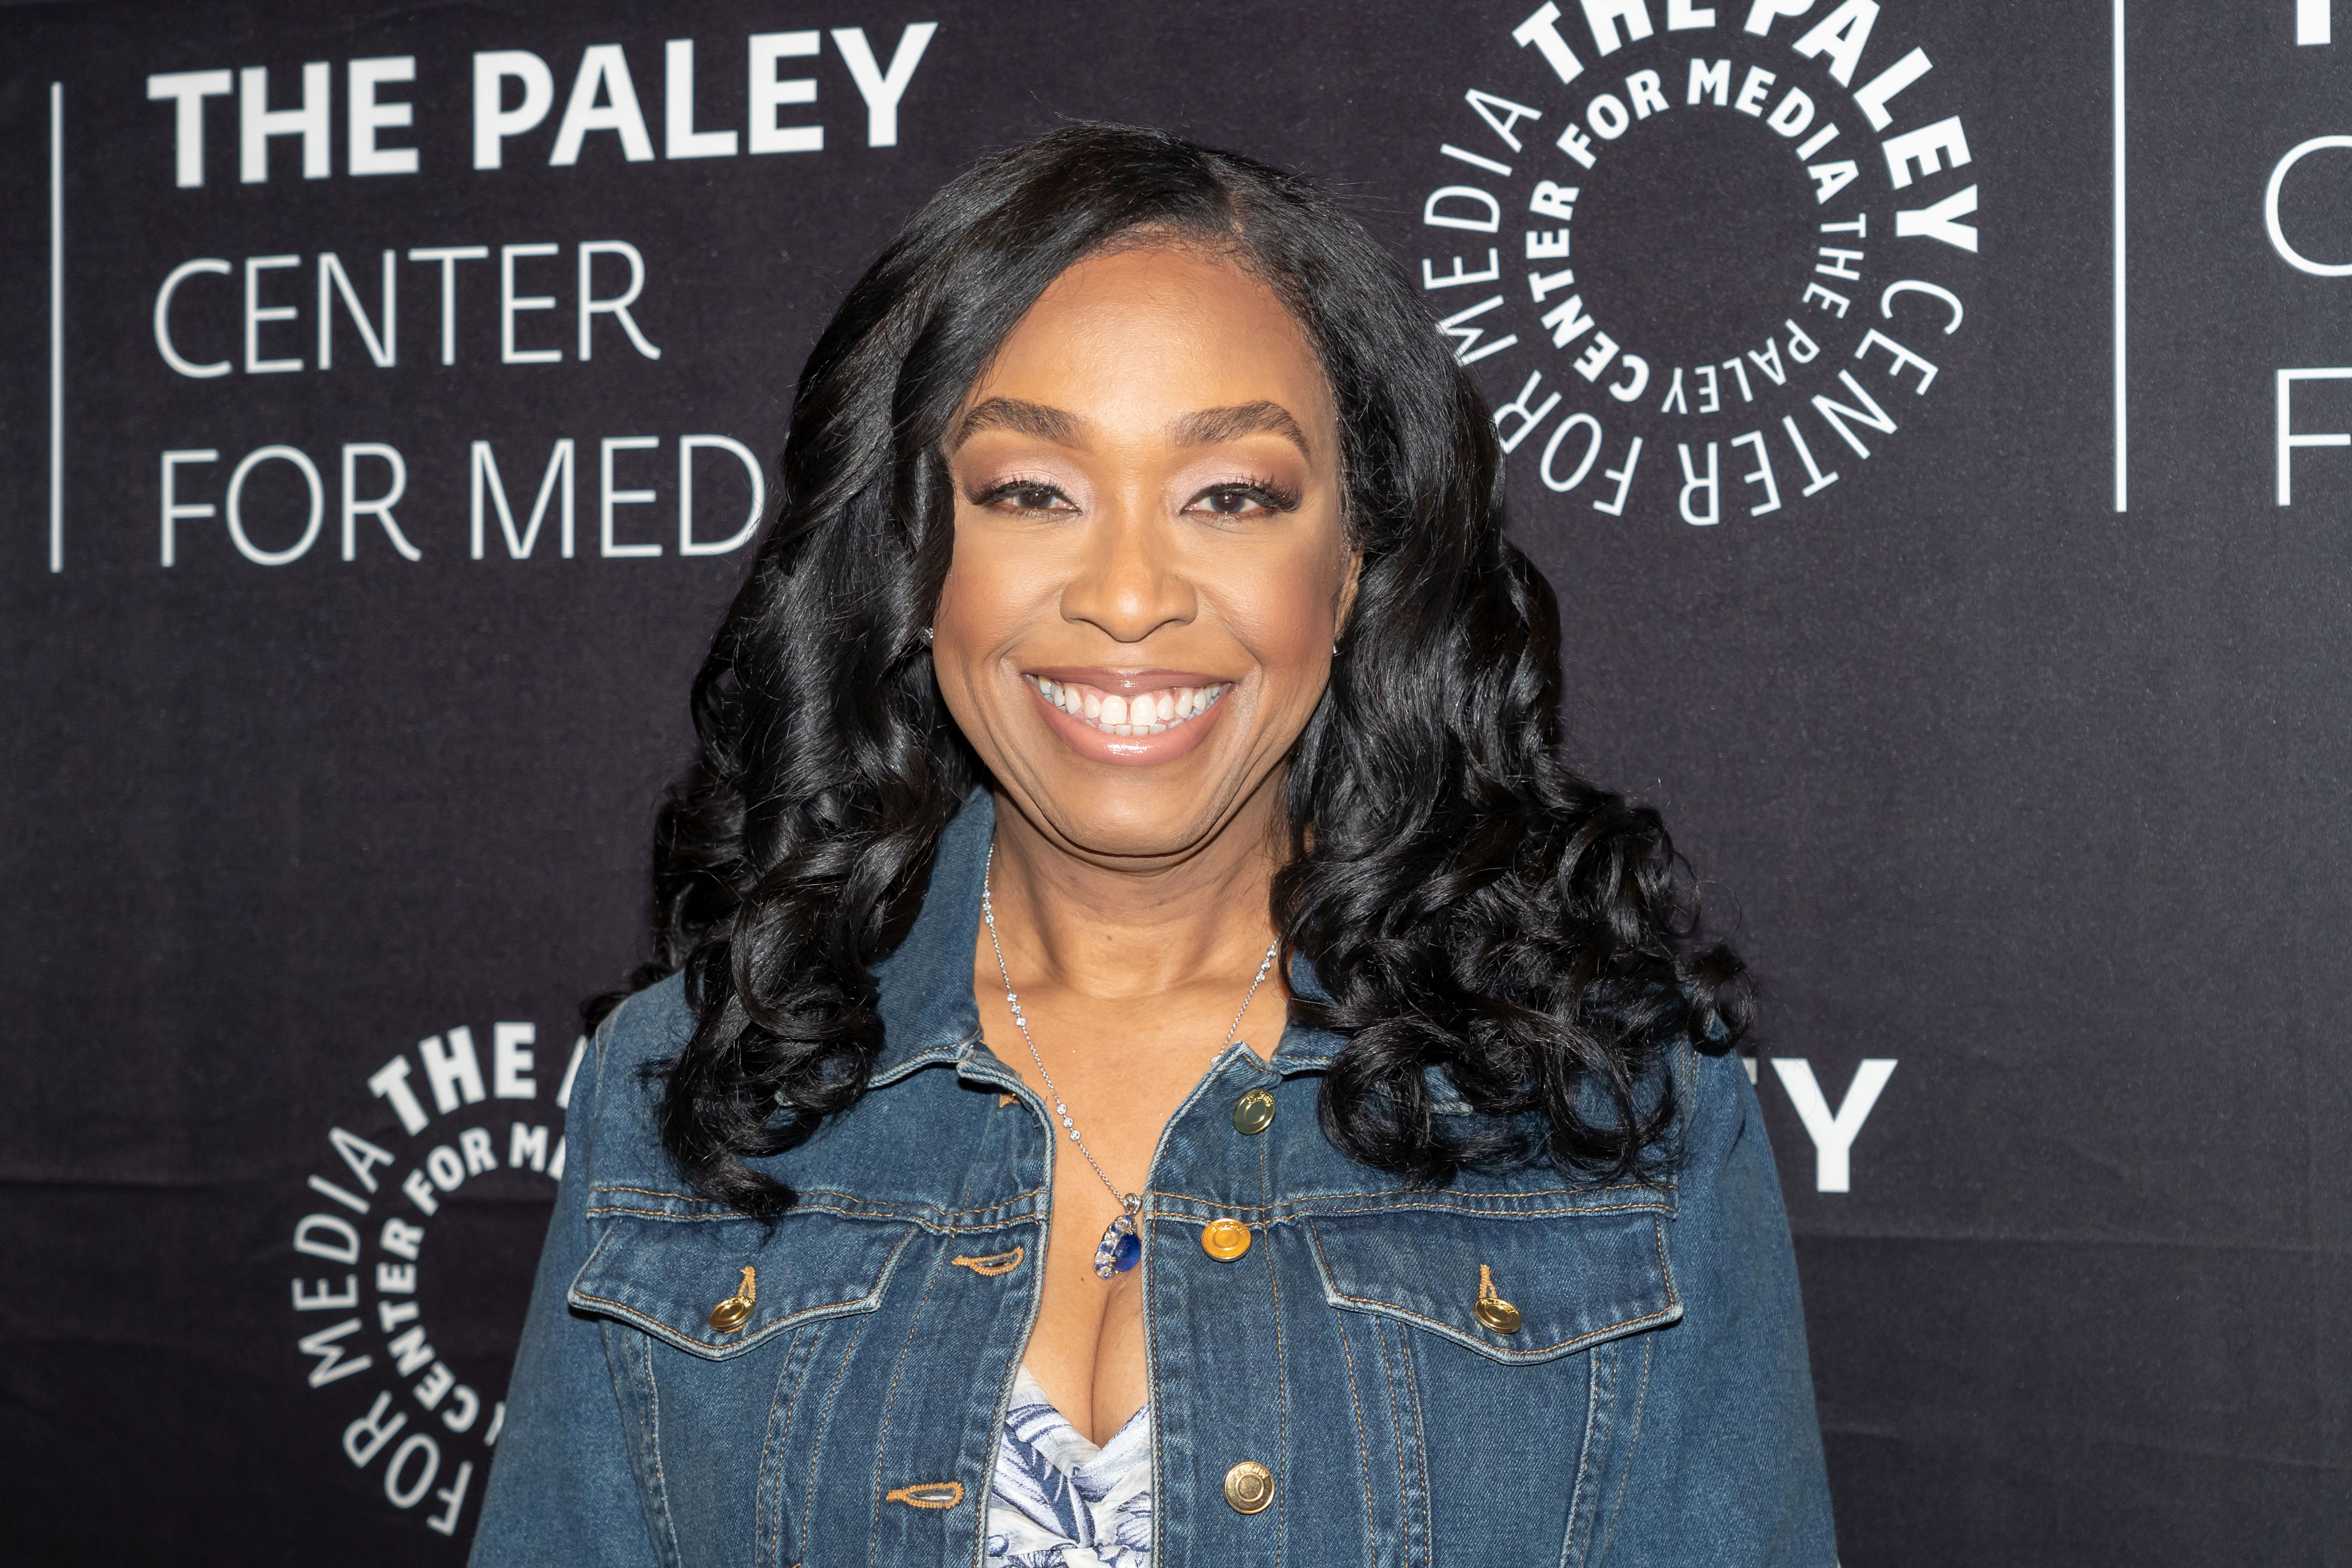 <p>Shonda Rhimes has made television history not once but twice (more on that next). The writer-producer became the highest paid showrunner in Hollywood when she signed a multimillion-dollar deal with Netflix in 2018, she confirmed while speaking at ELLE's 25th Annual Women in Hollywood celebration that October. Though she didn't disclose how much she was earning, she did share that the figure that had been reported -- a $100 million salary -- was incorrect. Considering peer Ryan Murphy signed a $300 million deal with Netflix, and Greg Berlanti signed a $400 million overall deal extension with Warner Bros. Television, we know it's got to be more than that! "When Ryan made his amazing deal with Netflix, what did he do? He shouted his salary to the world," Shonda said. "When I made a deal with Netflix, I let them report my salary wrong in the press, and then I did as few interviews as possible and I put my head down and worked." She then announced, earning herself a standing ovation, "I am the highest paid showrunner in television."</p>